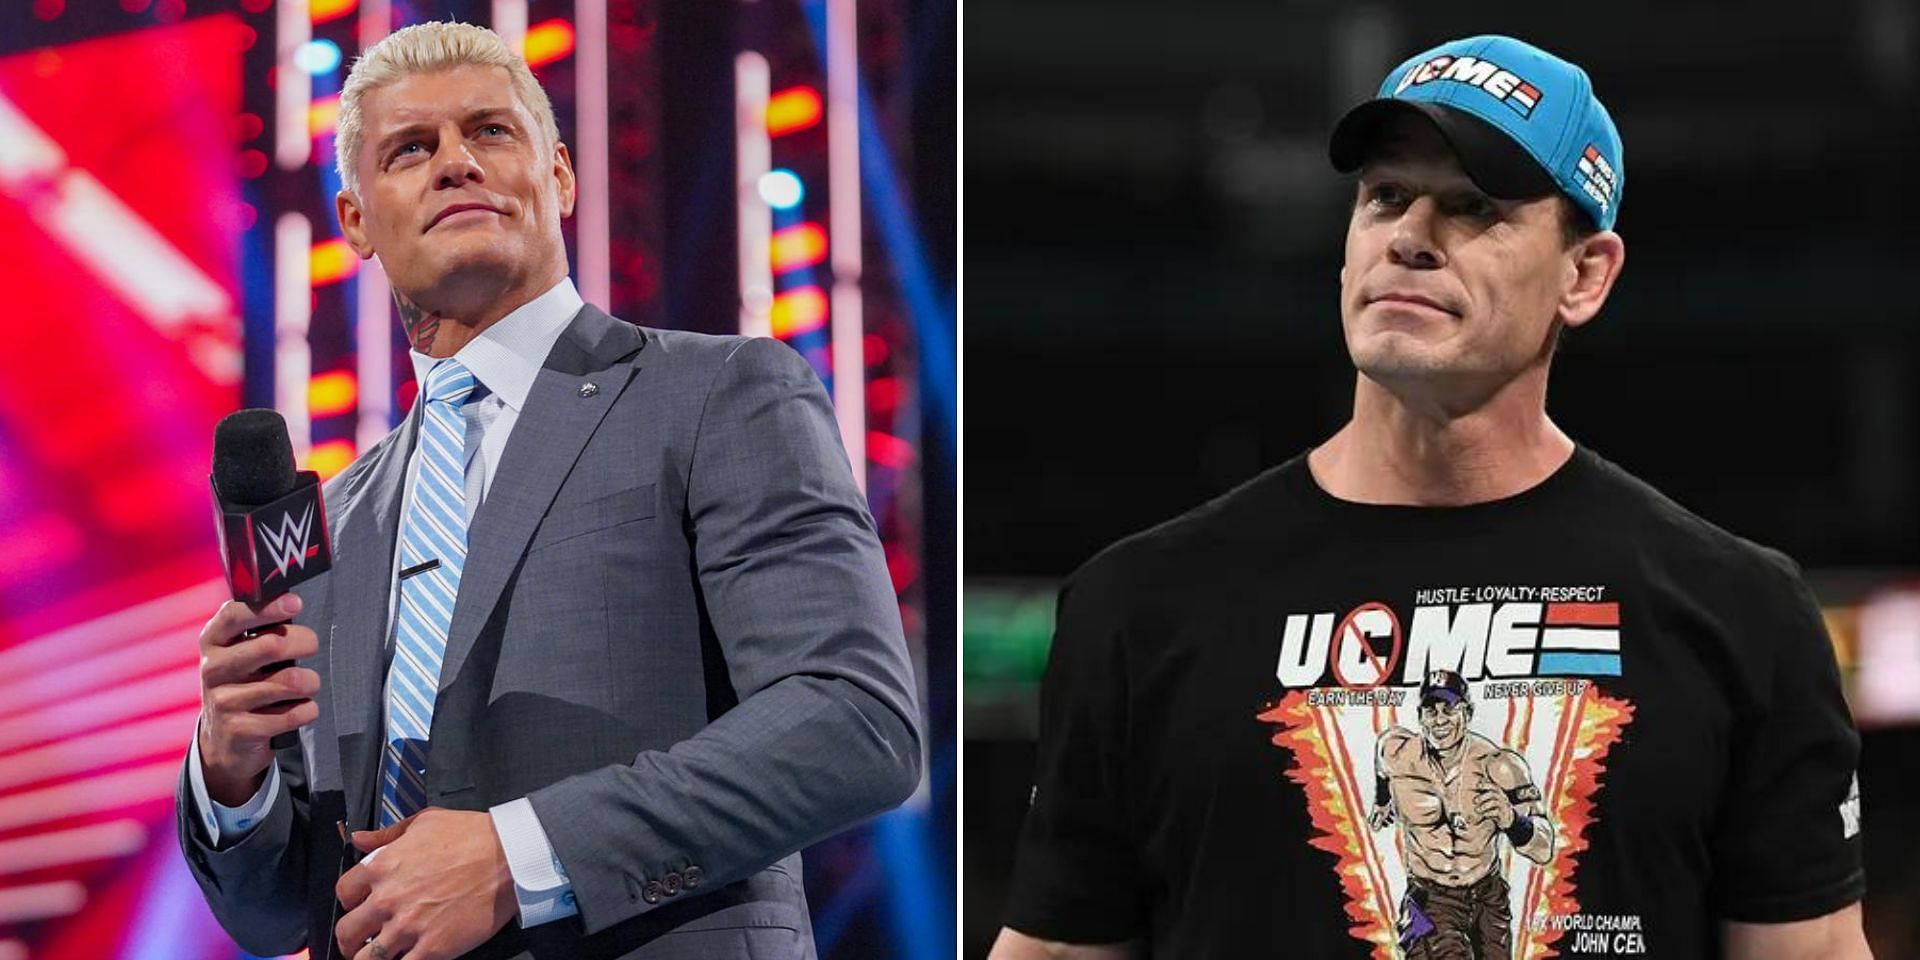 Cody Rhodes commented on possibly facing John Cena